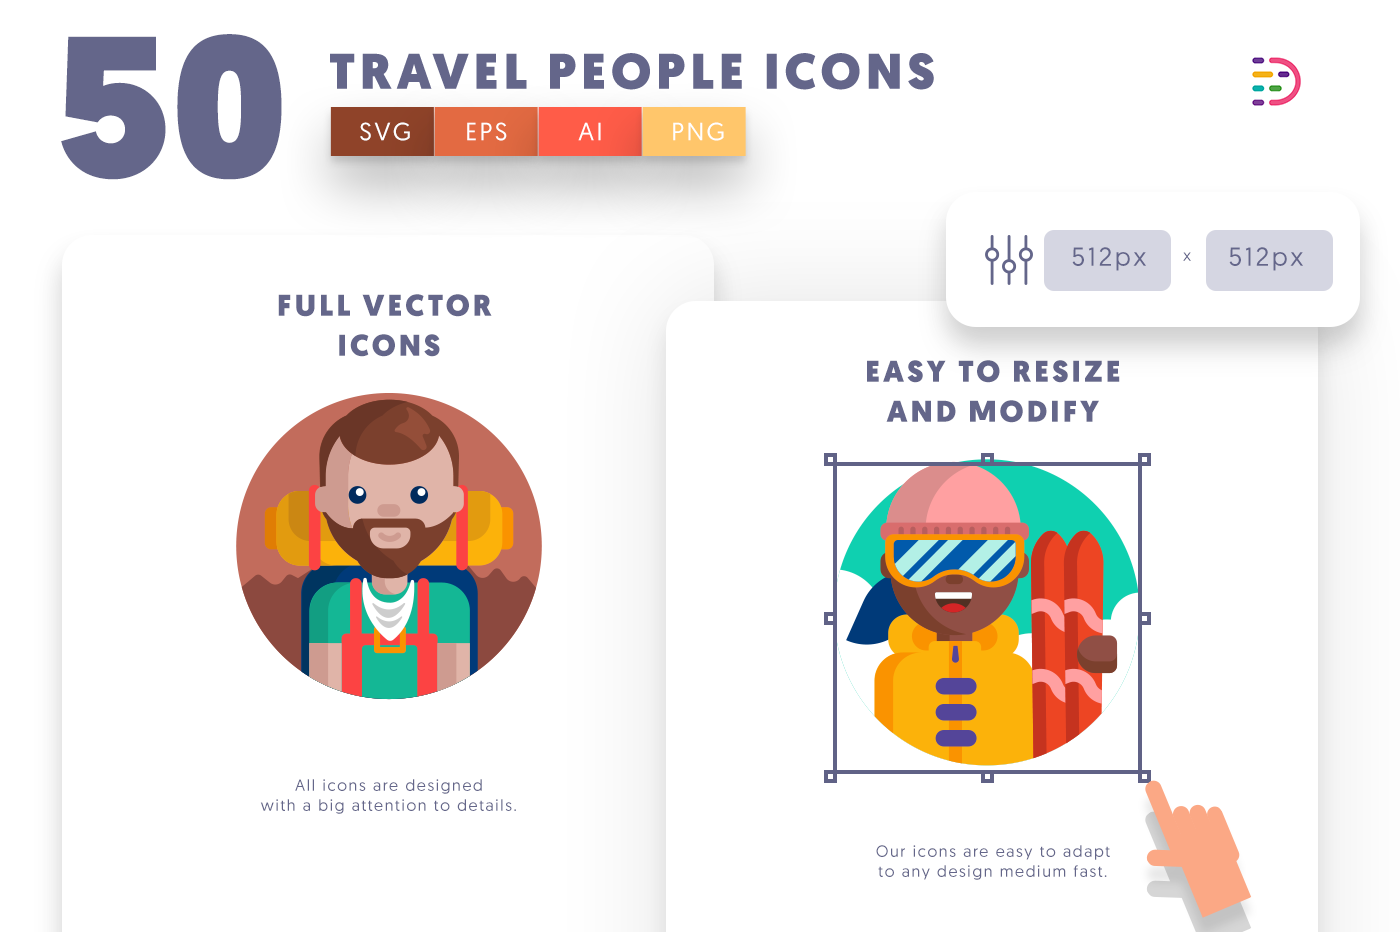 Customizable and vector 50 Travel People Icons